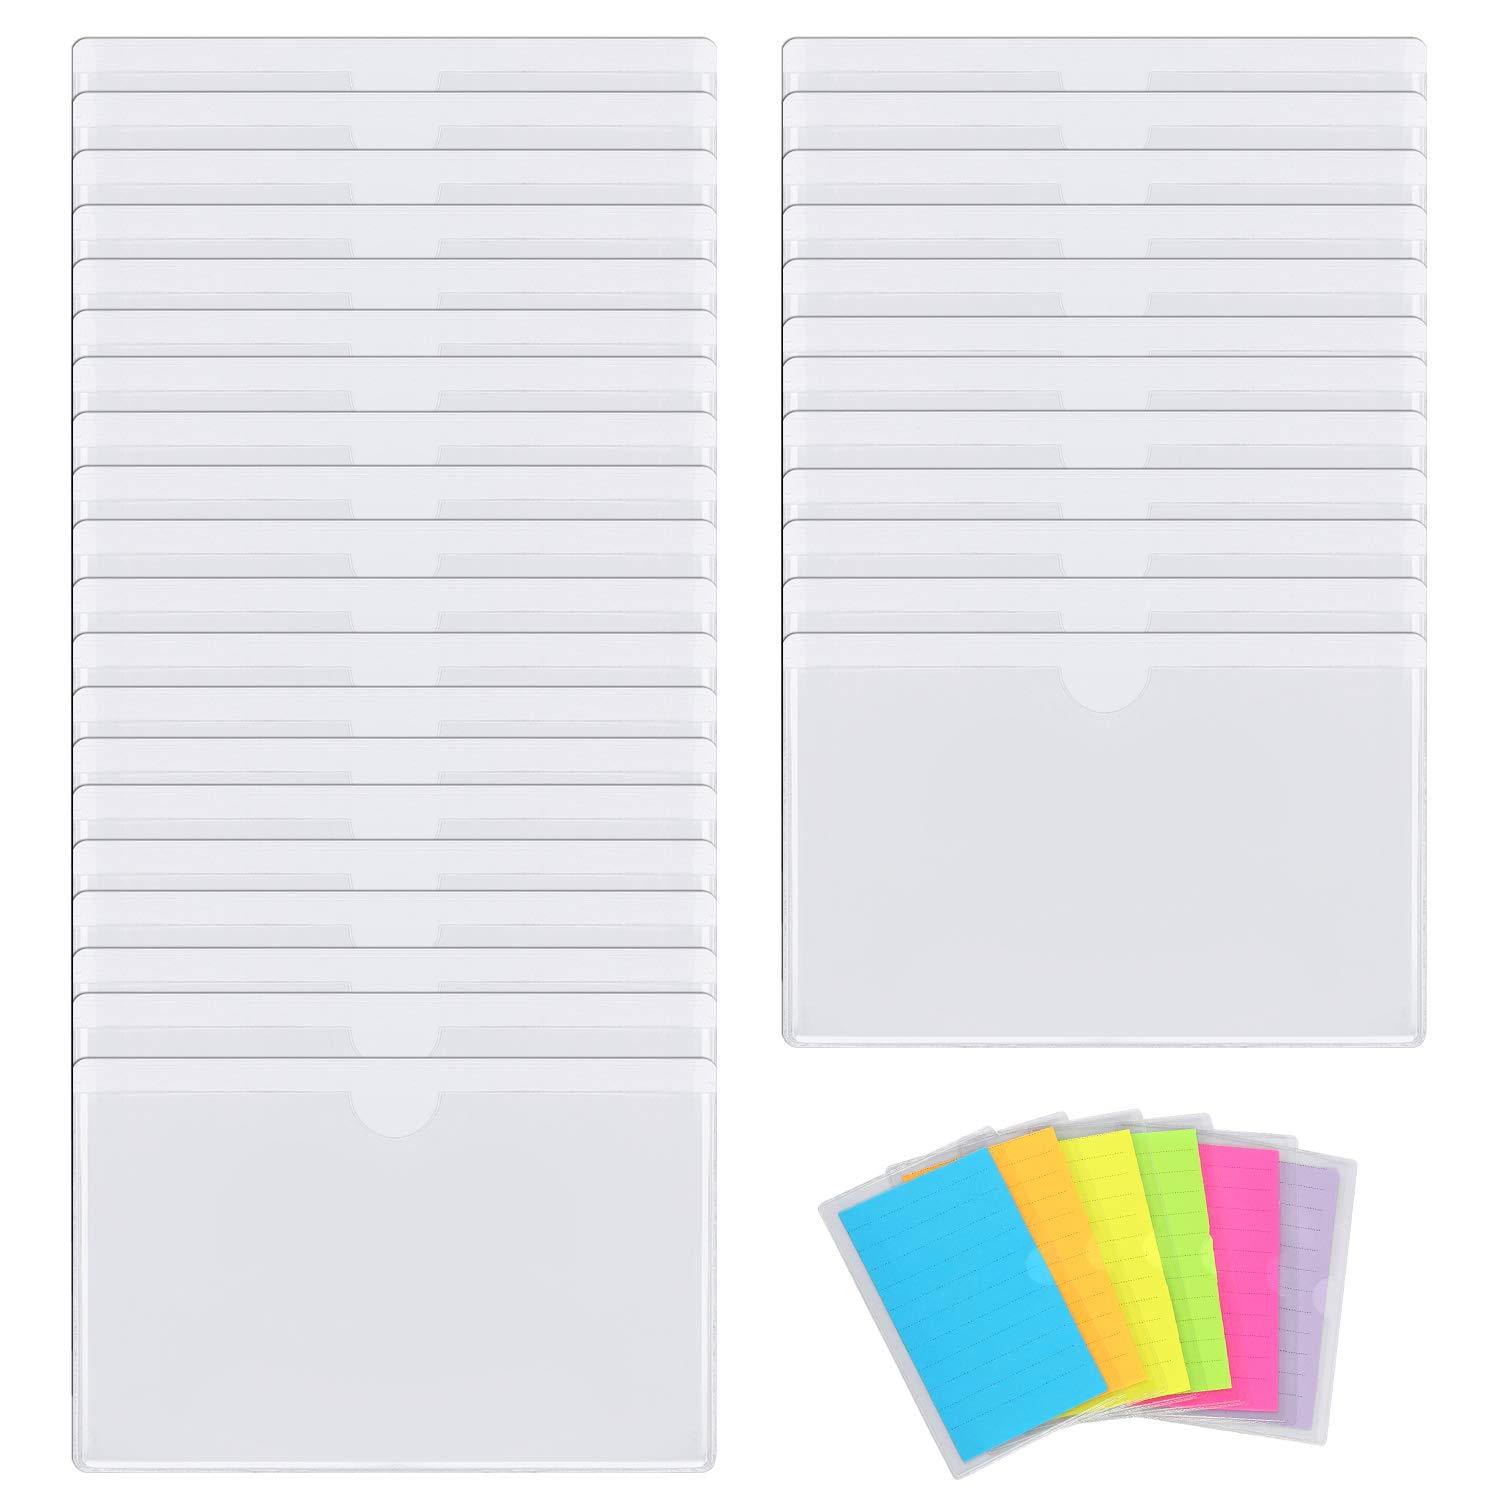 L-BOST Self-Adhesive Card Pockets 3.55x4.72 Adhesive Label Pockets for Index Cards Pack of 15 